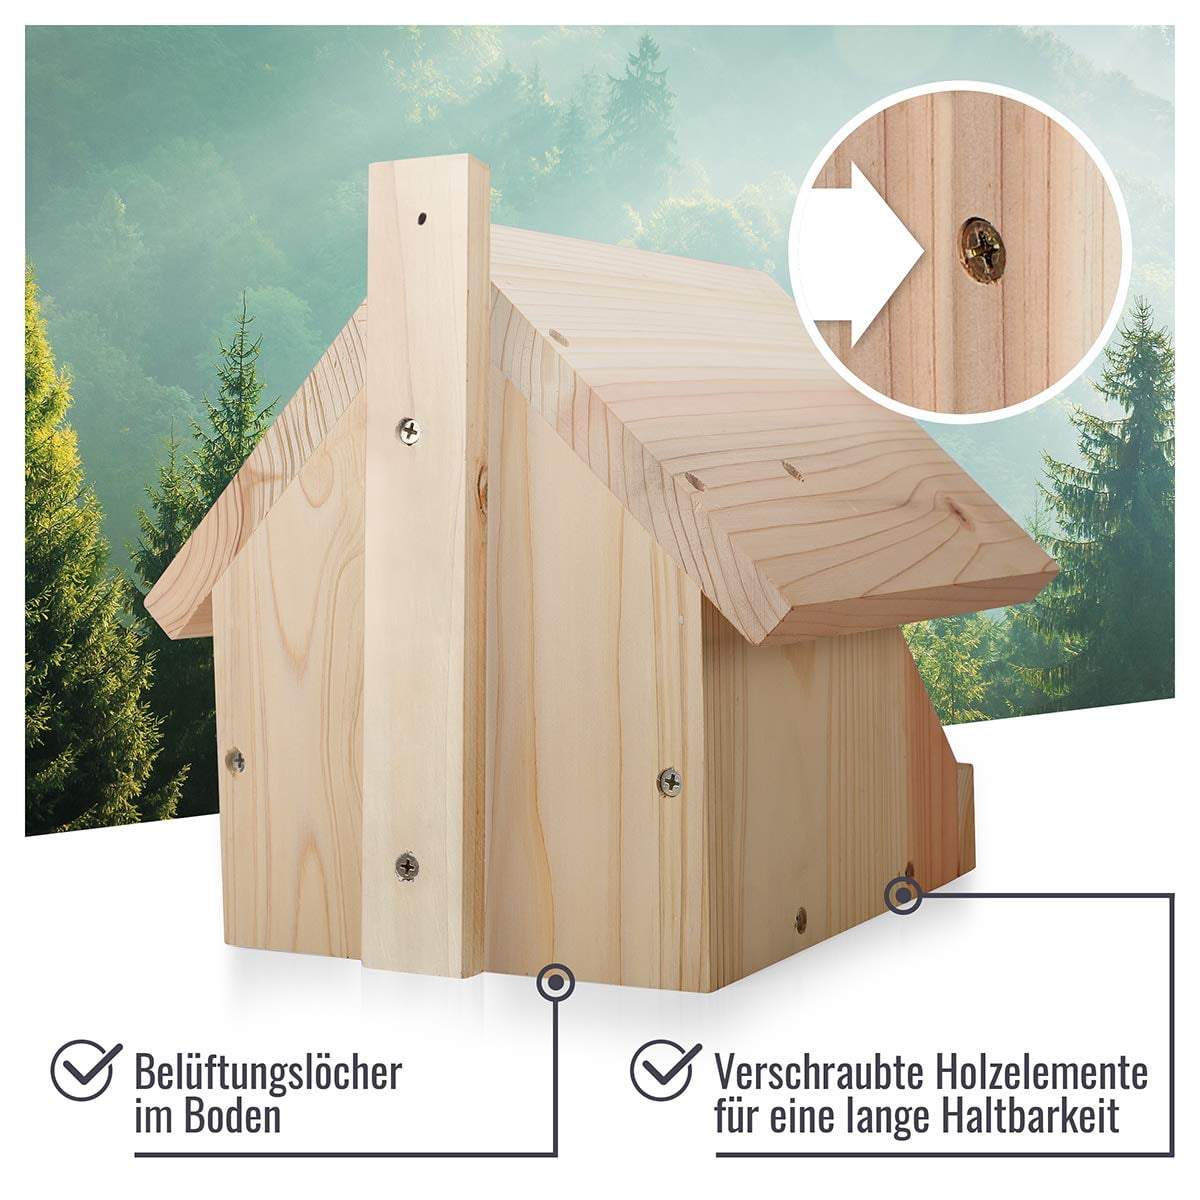 wildtier herz I Blackbird nest Box Made of Screwed Solid Wood - 10 x 11.5 x 11 in, Weatherproof & untreated, Aviary for Half-cave Breeders, Half-cave for Blackbirds, Robins & Co.